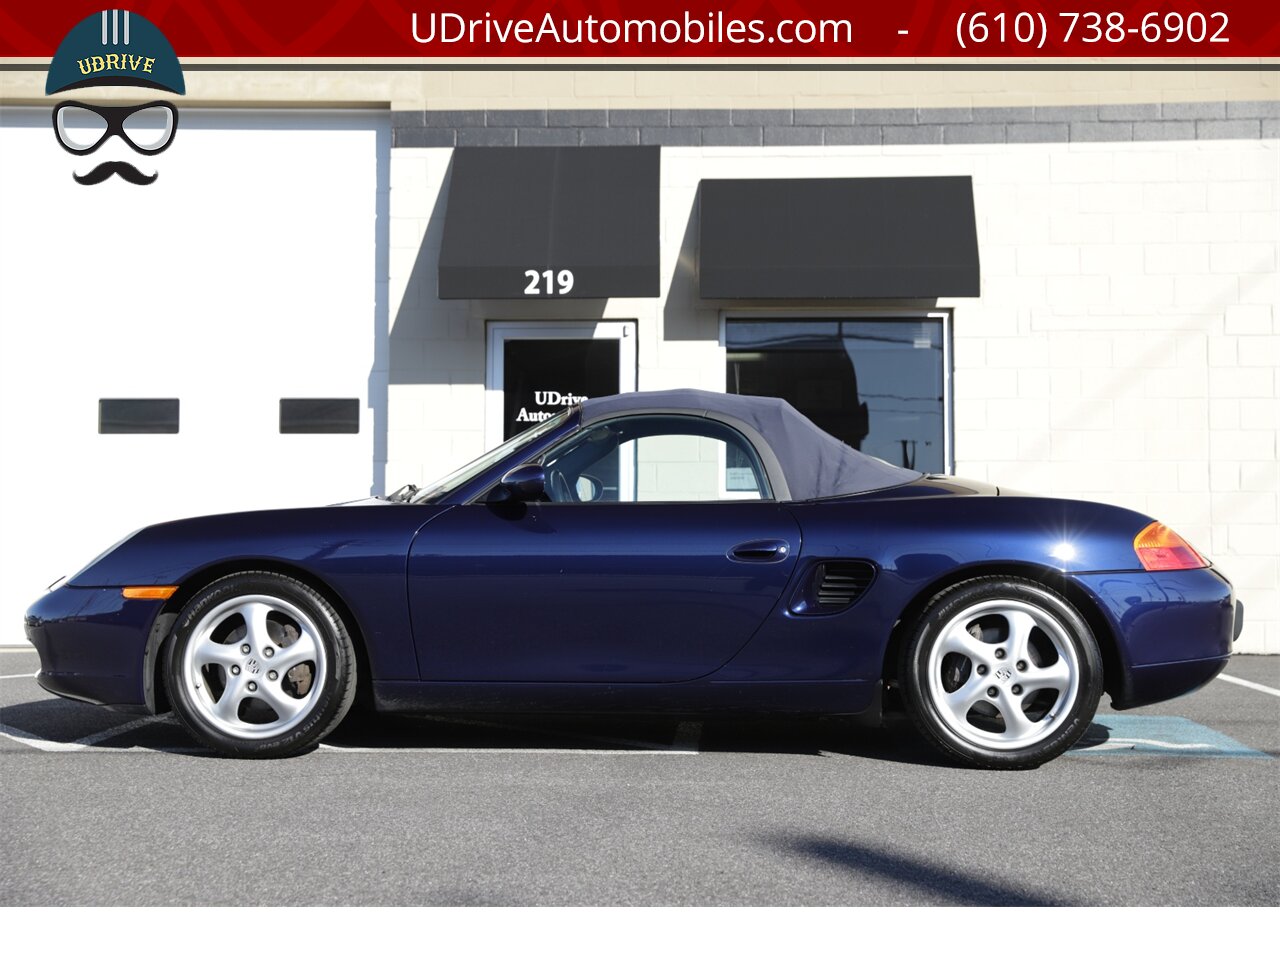 2001 Porsche Boxster 5 Speed Manual Detailed Service History  Same Owner for Last 18 Years Hard Top Included - Photo 7 - West Chester, PA 19382